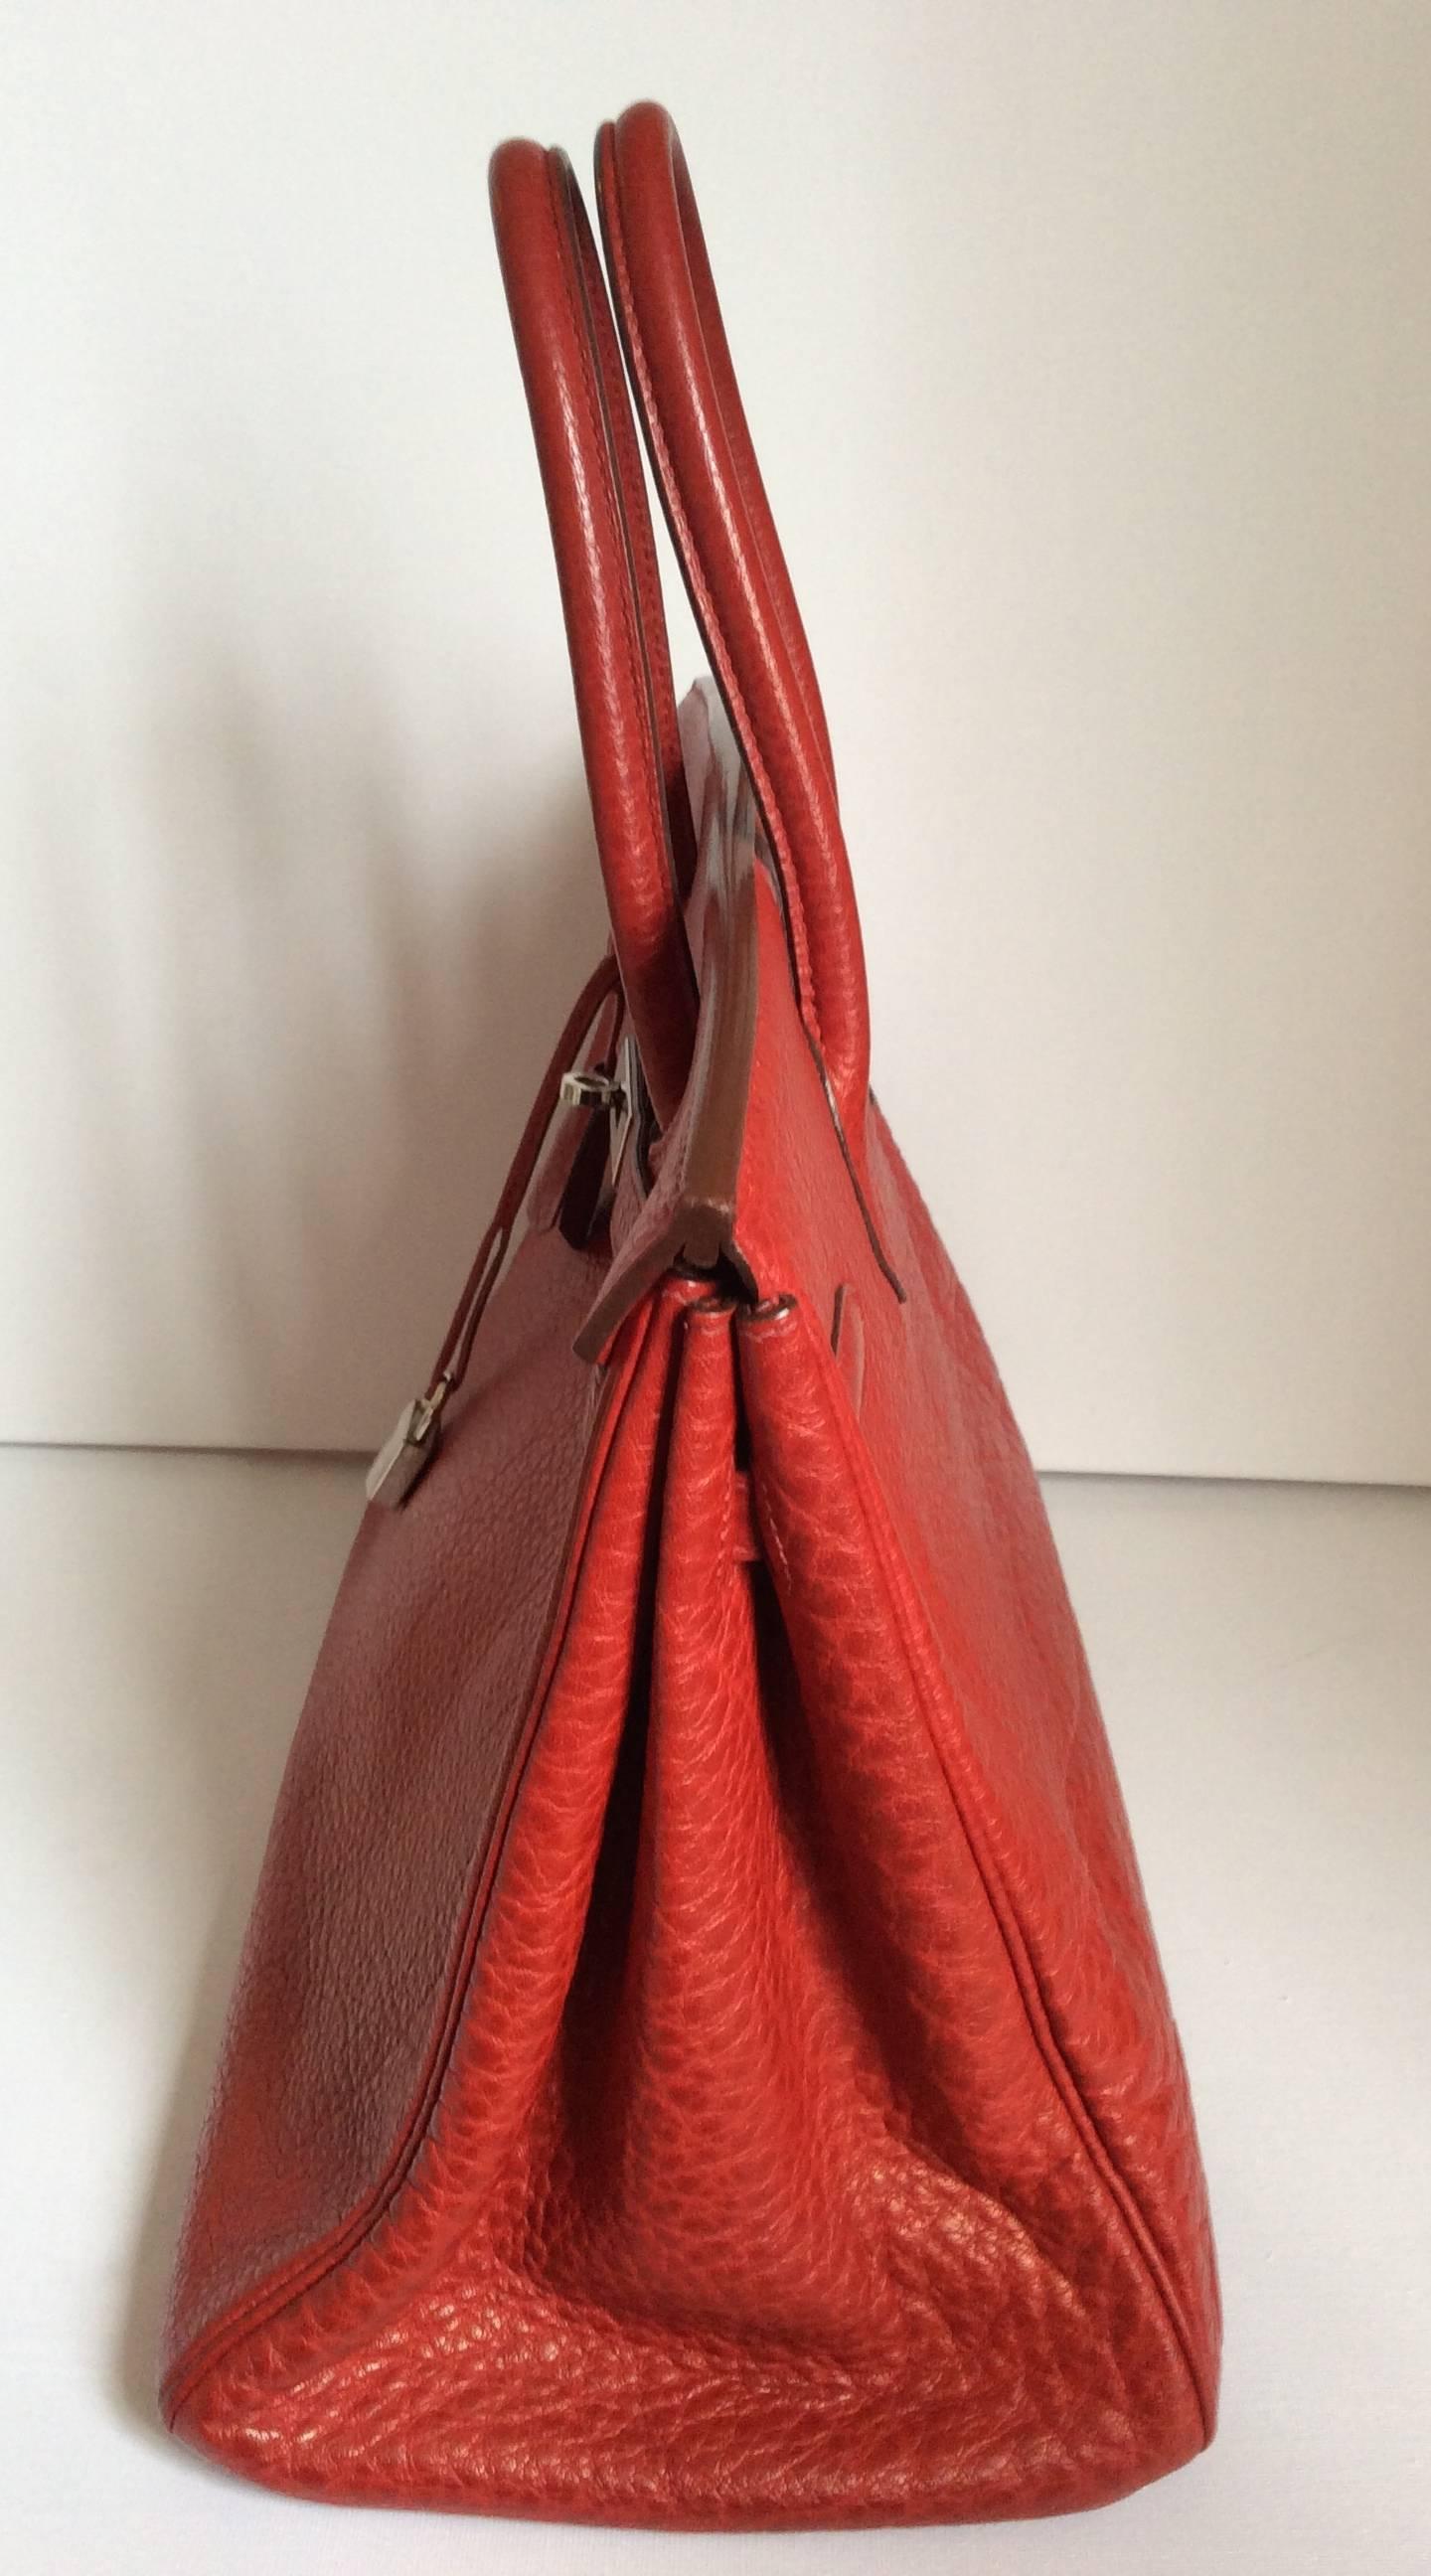 Presented here is a magnificent Hermes Birkin bag in red buffalo. The bag is a size 35 and is in near mint condition. This bag appears to have only been used a few times and probably was stored mostly in a closet for safe keeping. The bag is stamped